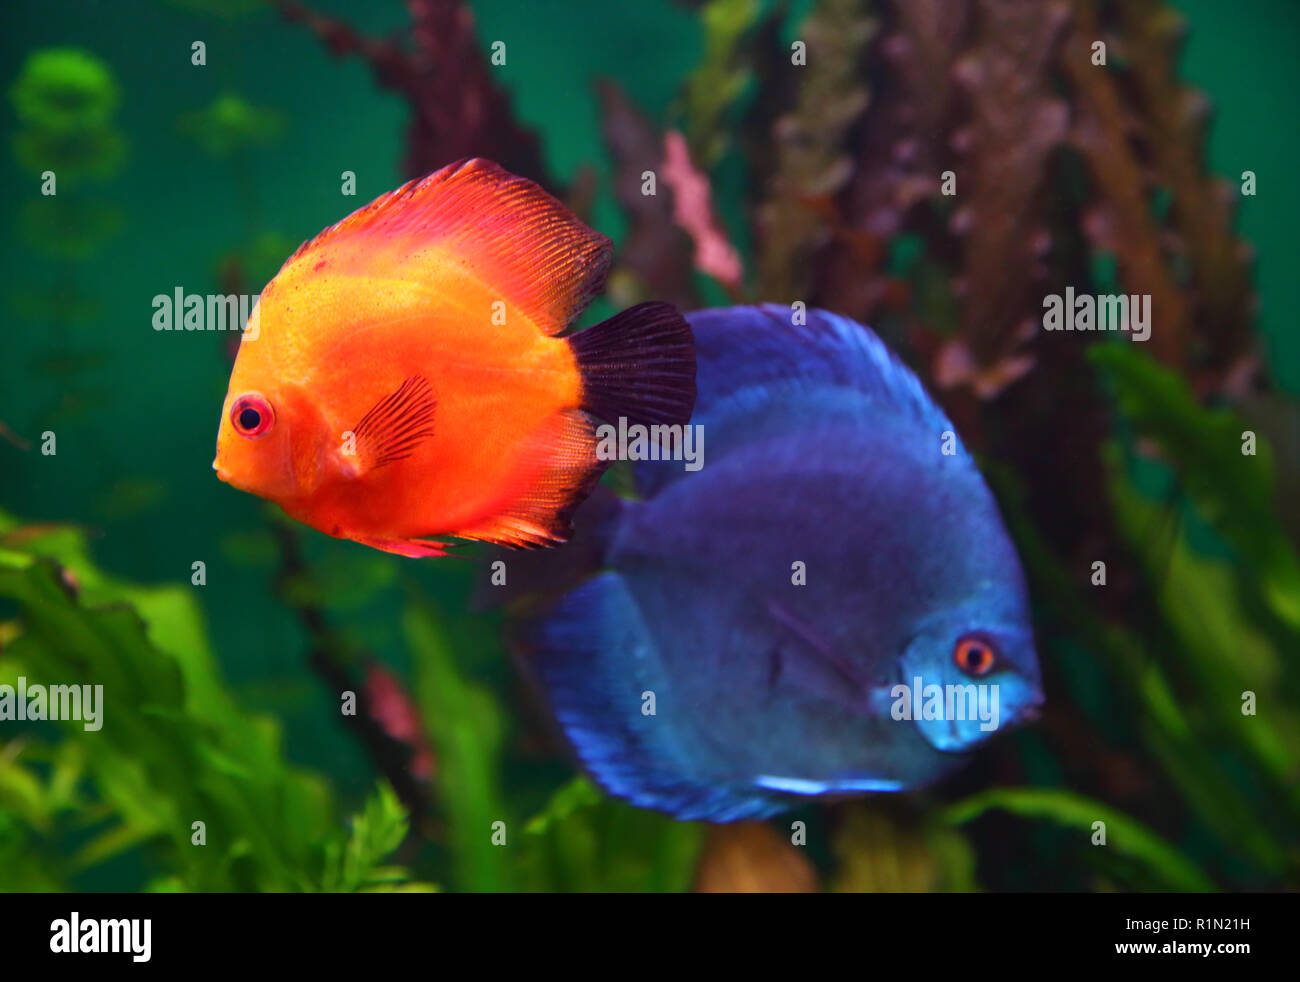 red and blue discus fish Stock Photo